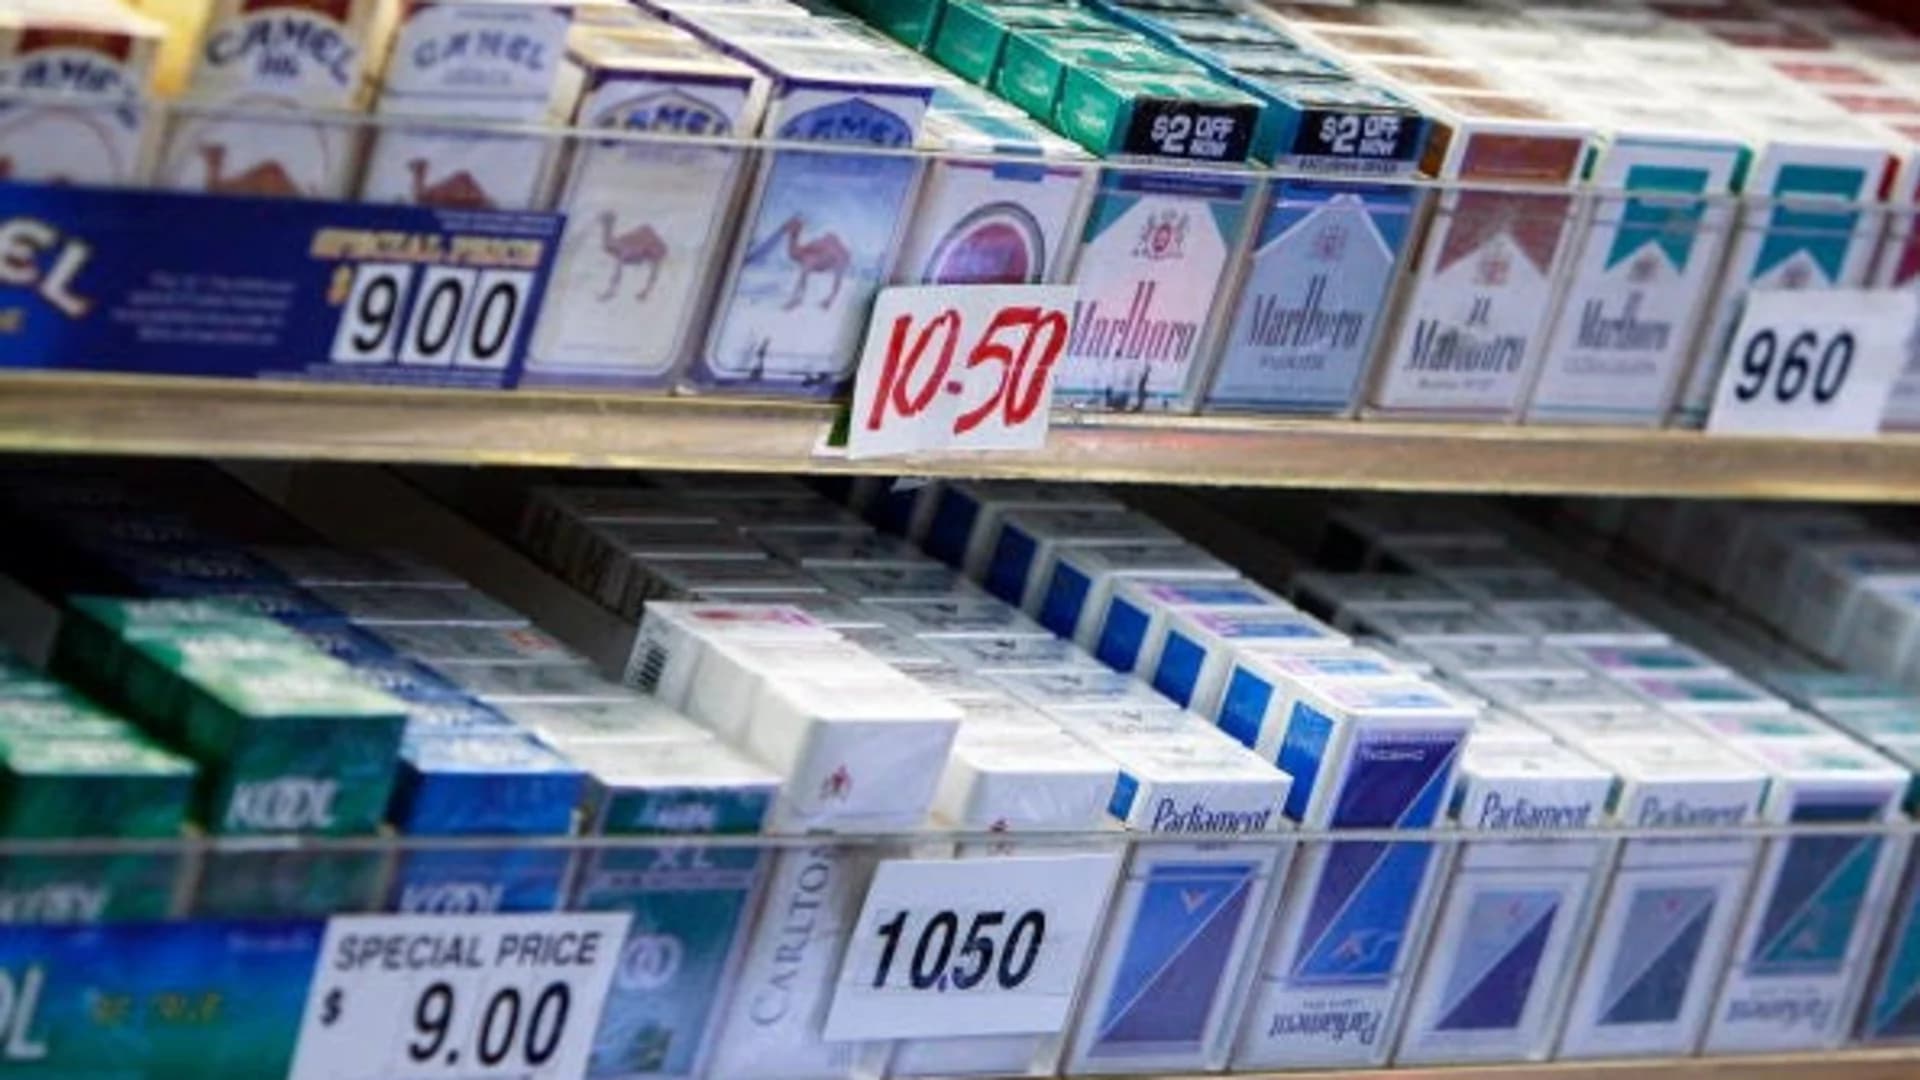 NYC hikes price of pack of cigarettes to $13, highest in US